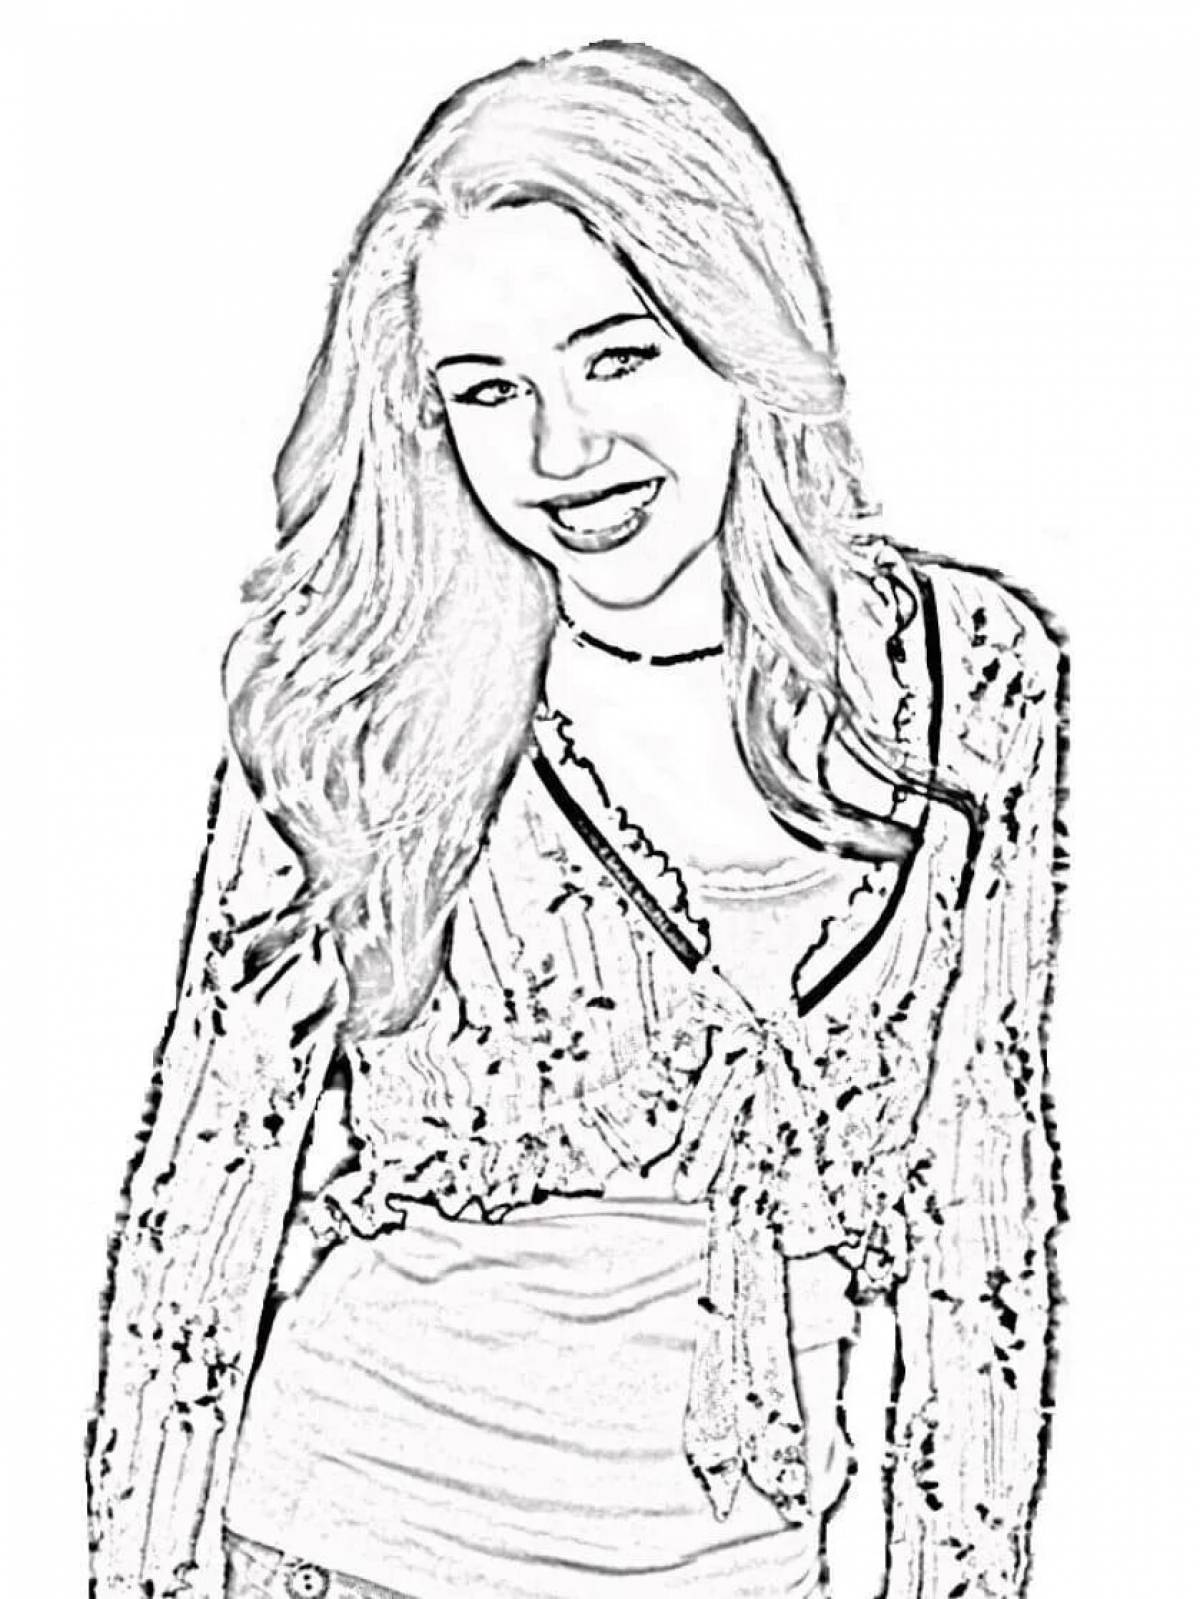 Miley Cyrus' amazing coloring page